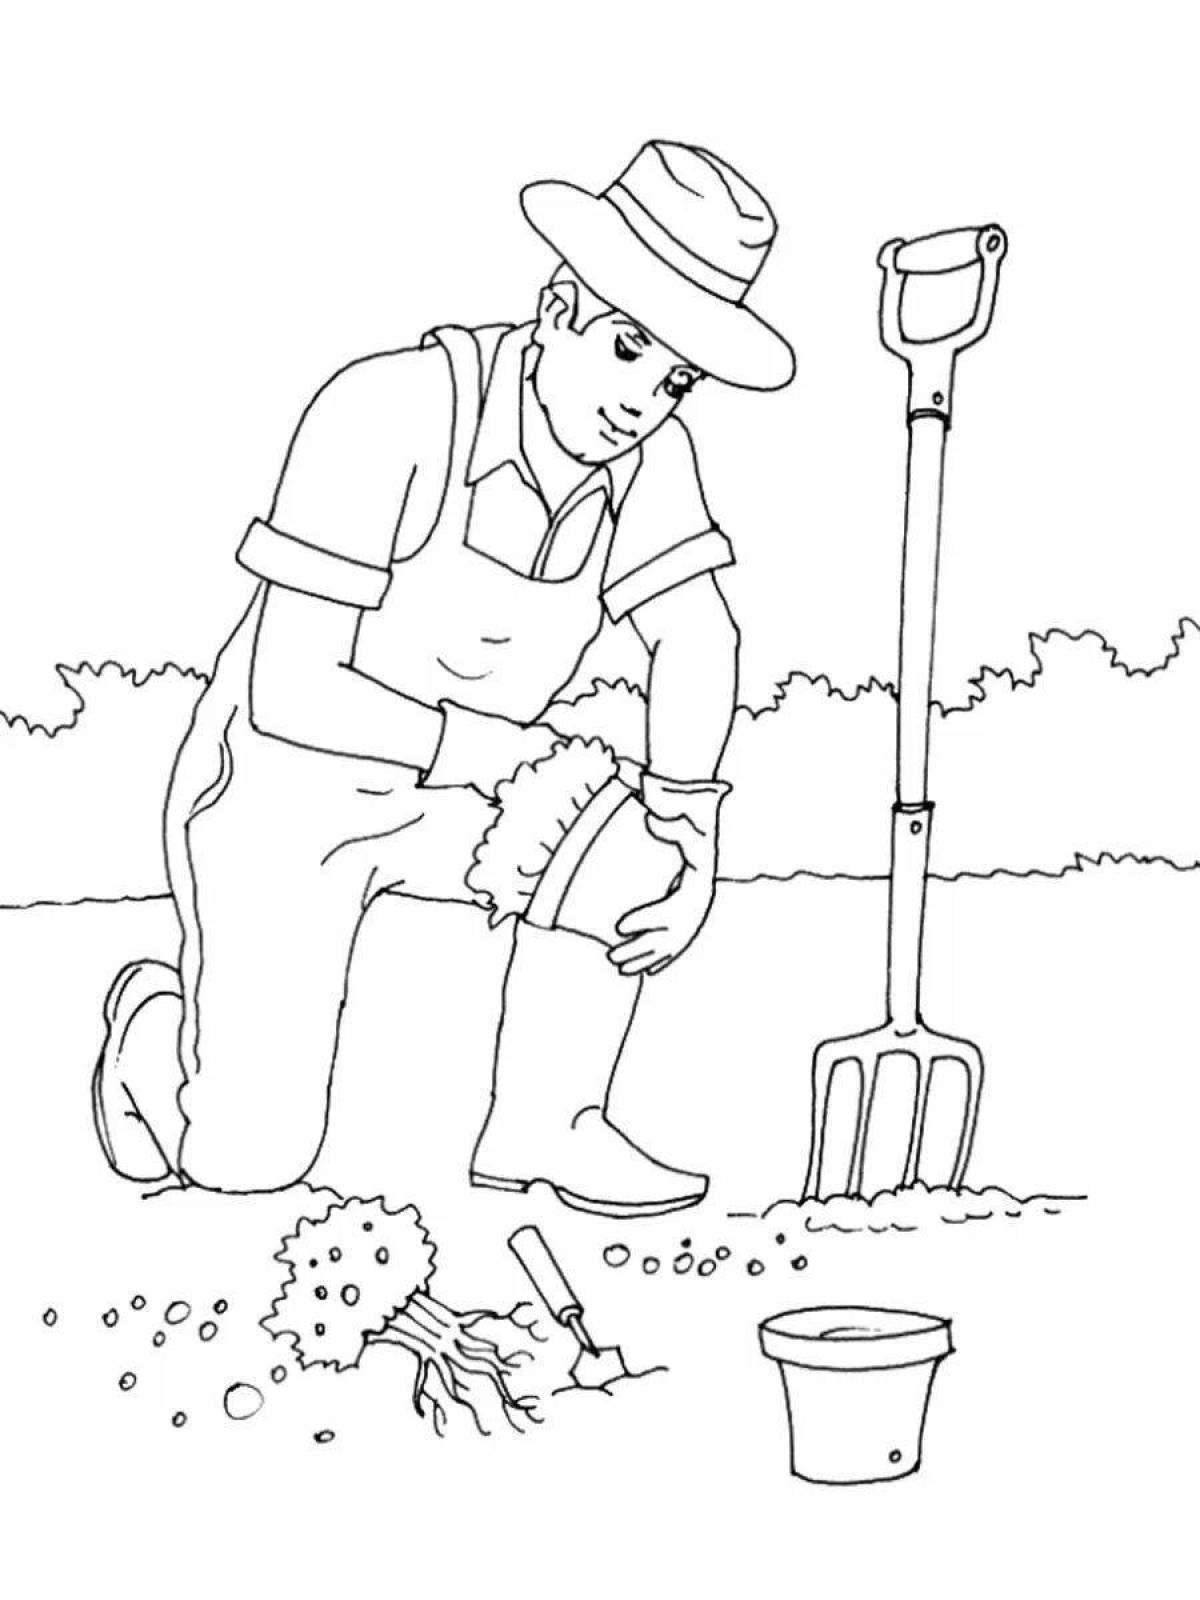 Farm coloring book for kids